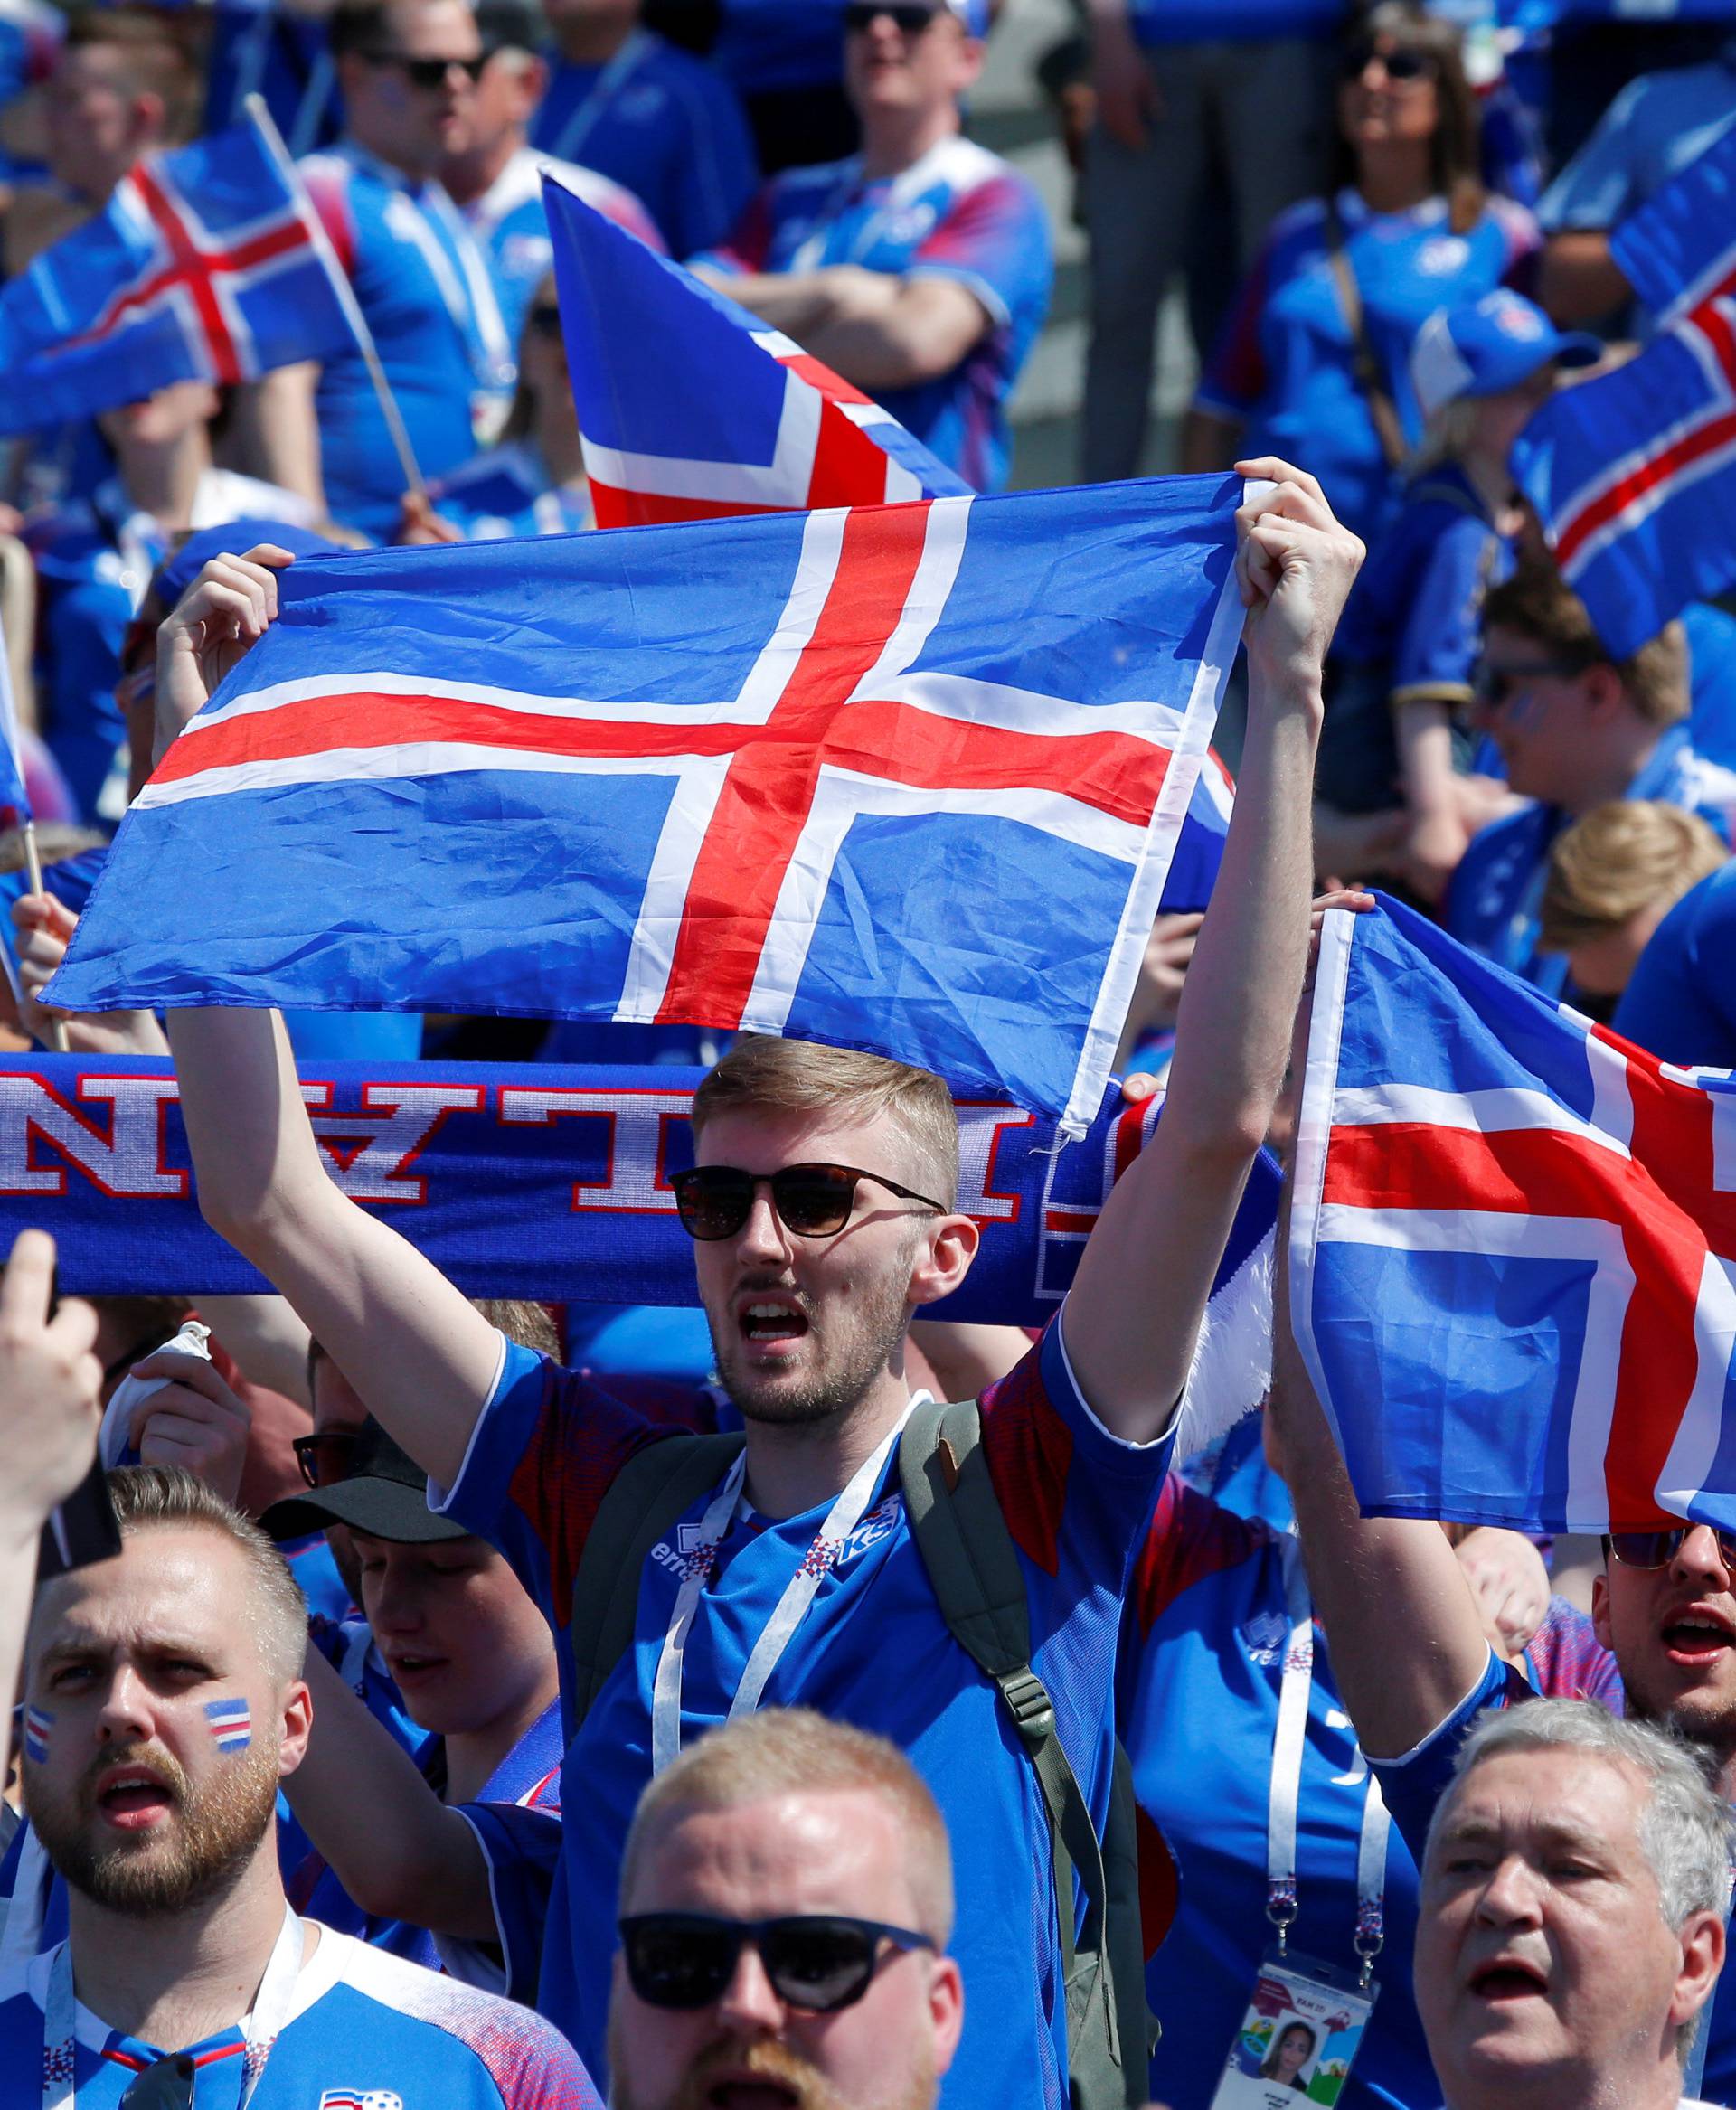 FILE PHOTO: Supporters of Iceland cheer in Zaryadye Park Moscow, Russia - June 16, 2018